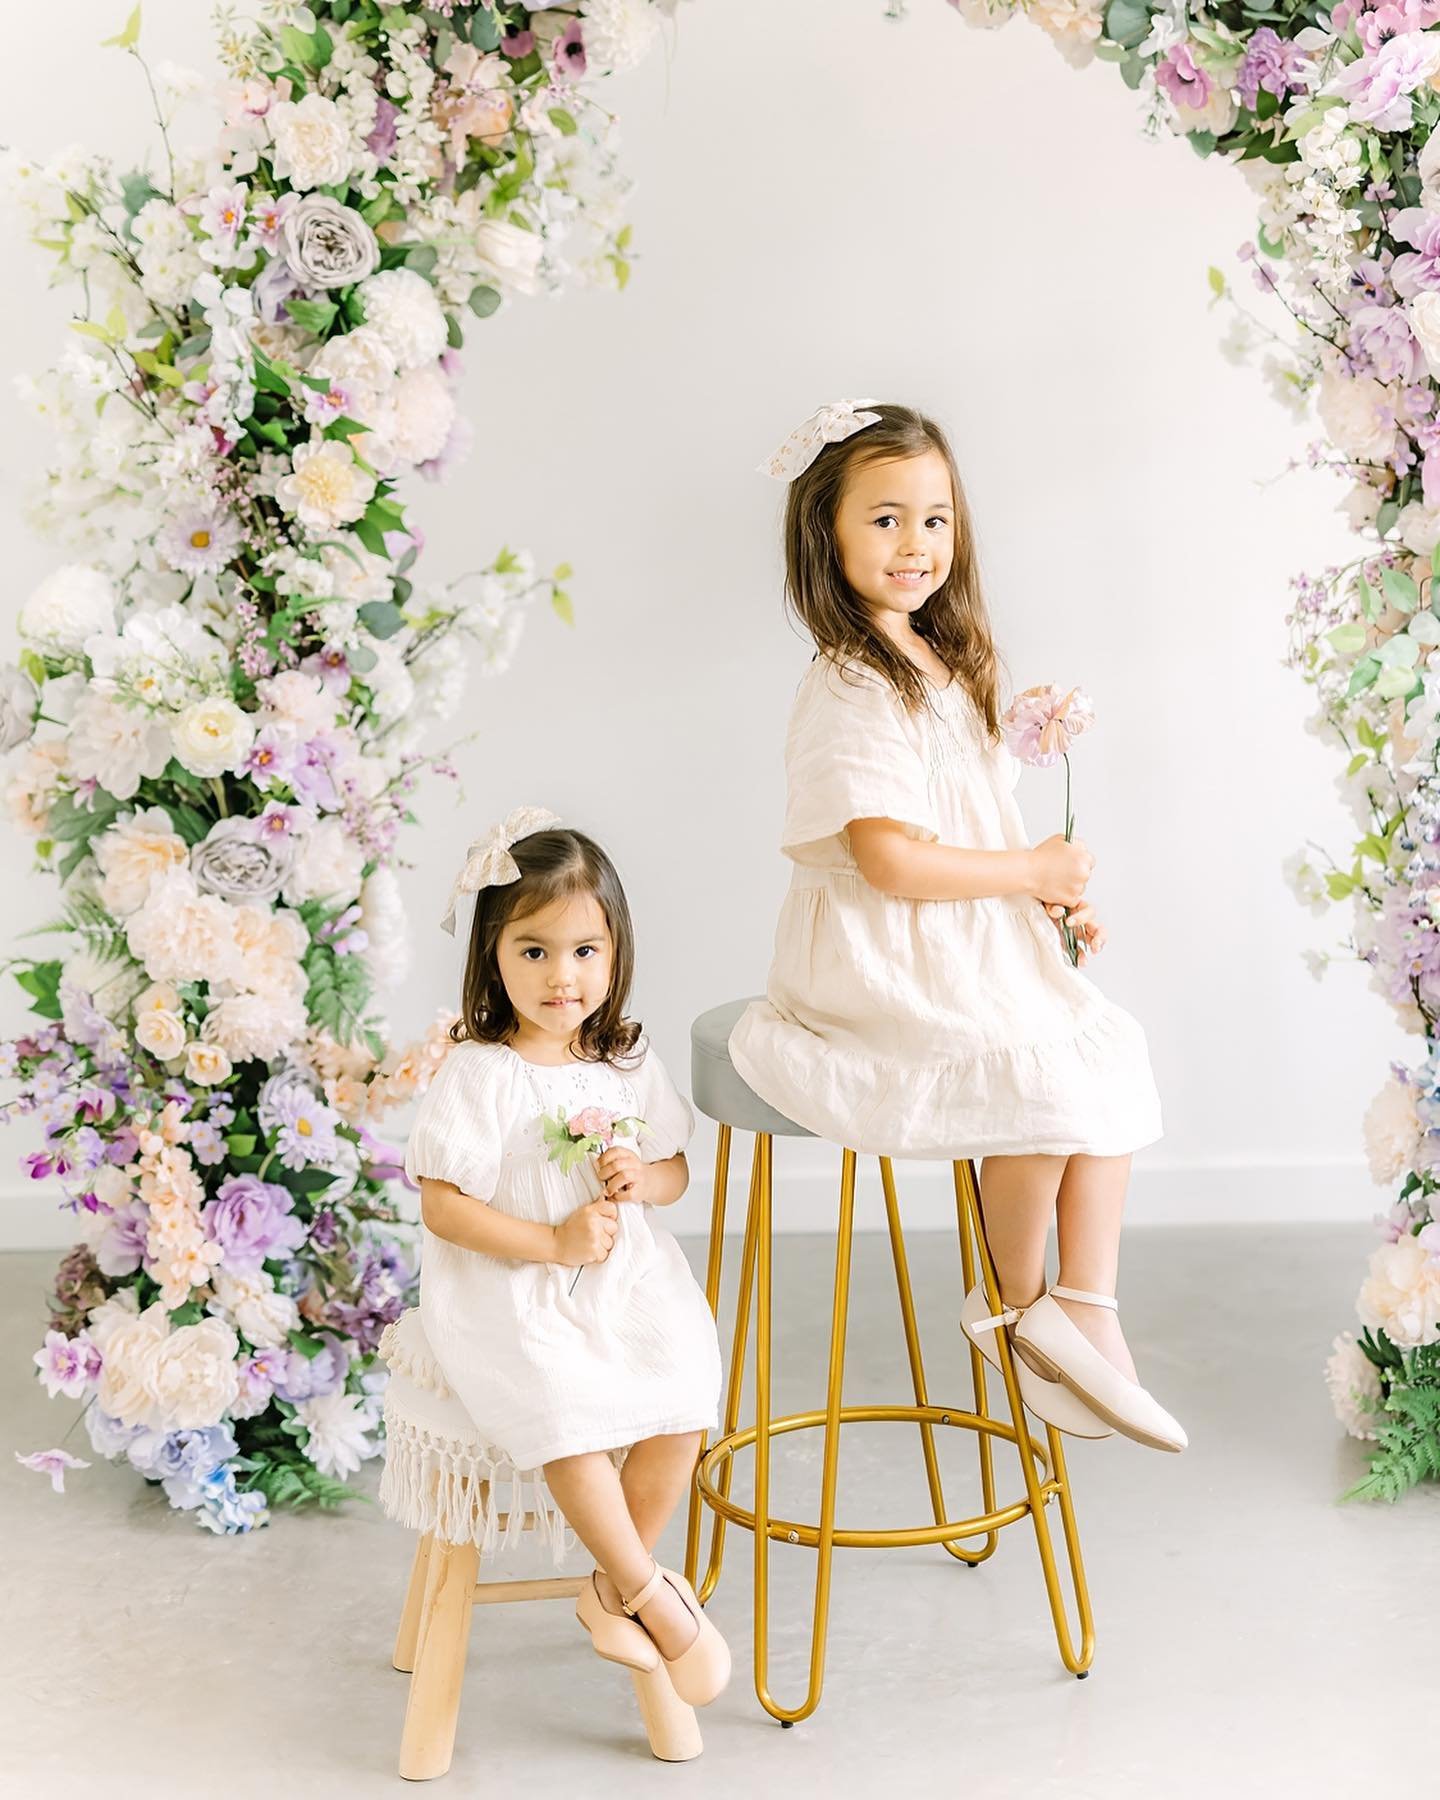 Capturing moments of sisterly love in the studio was an absolute dream 🤍 With the minimal but oh-so-gorgeous florals and a backdrop of soft pink hues, the atmosphere was simply magical and the perfect setting to photograph these two sweet sisters.
.